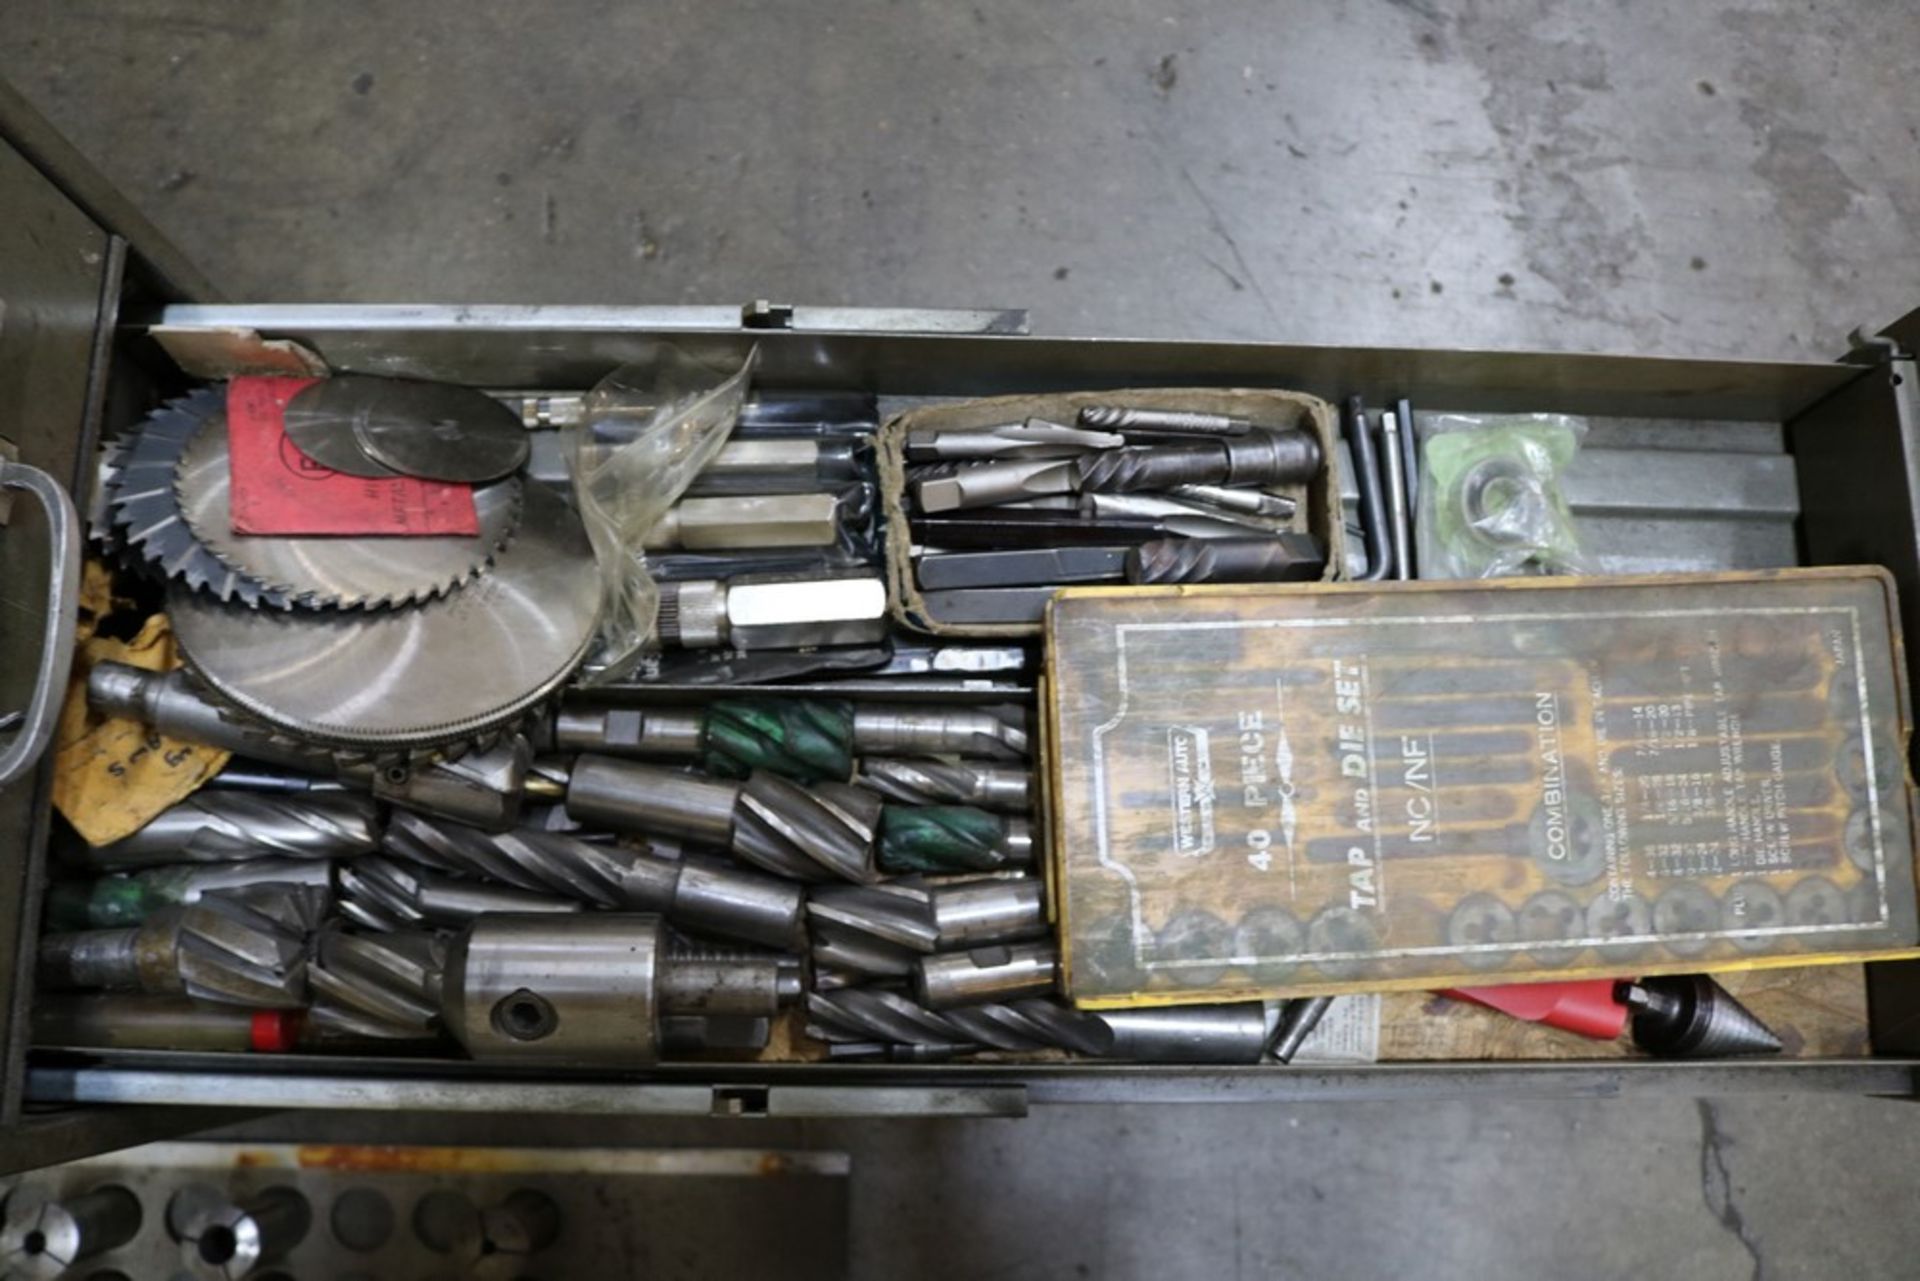 11 Drawer Metal Tooling Cabinet Full of New and Used Tooling, End Mills, Counter Sinks, Threading - Image 12 of 13